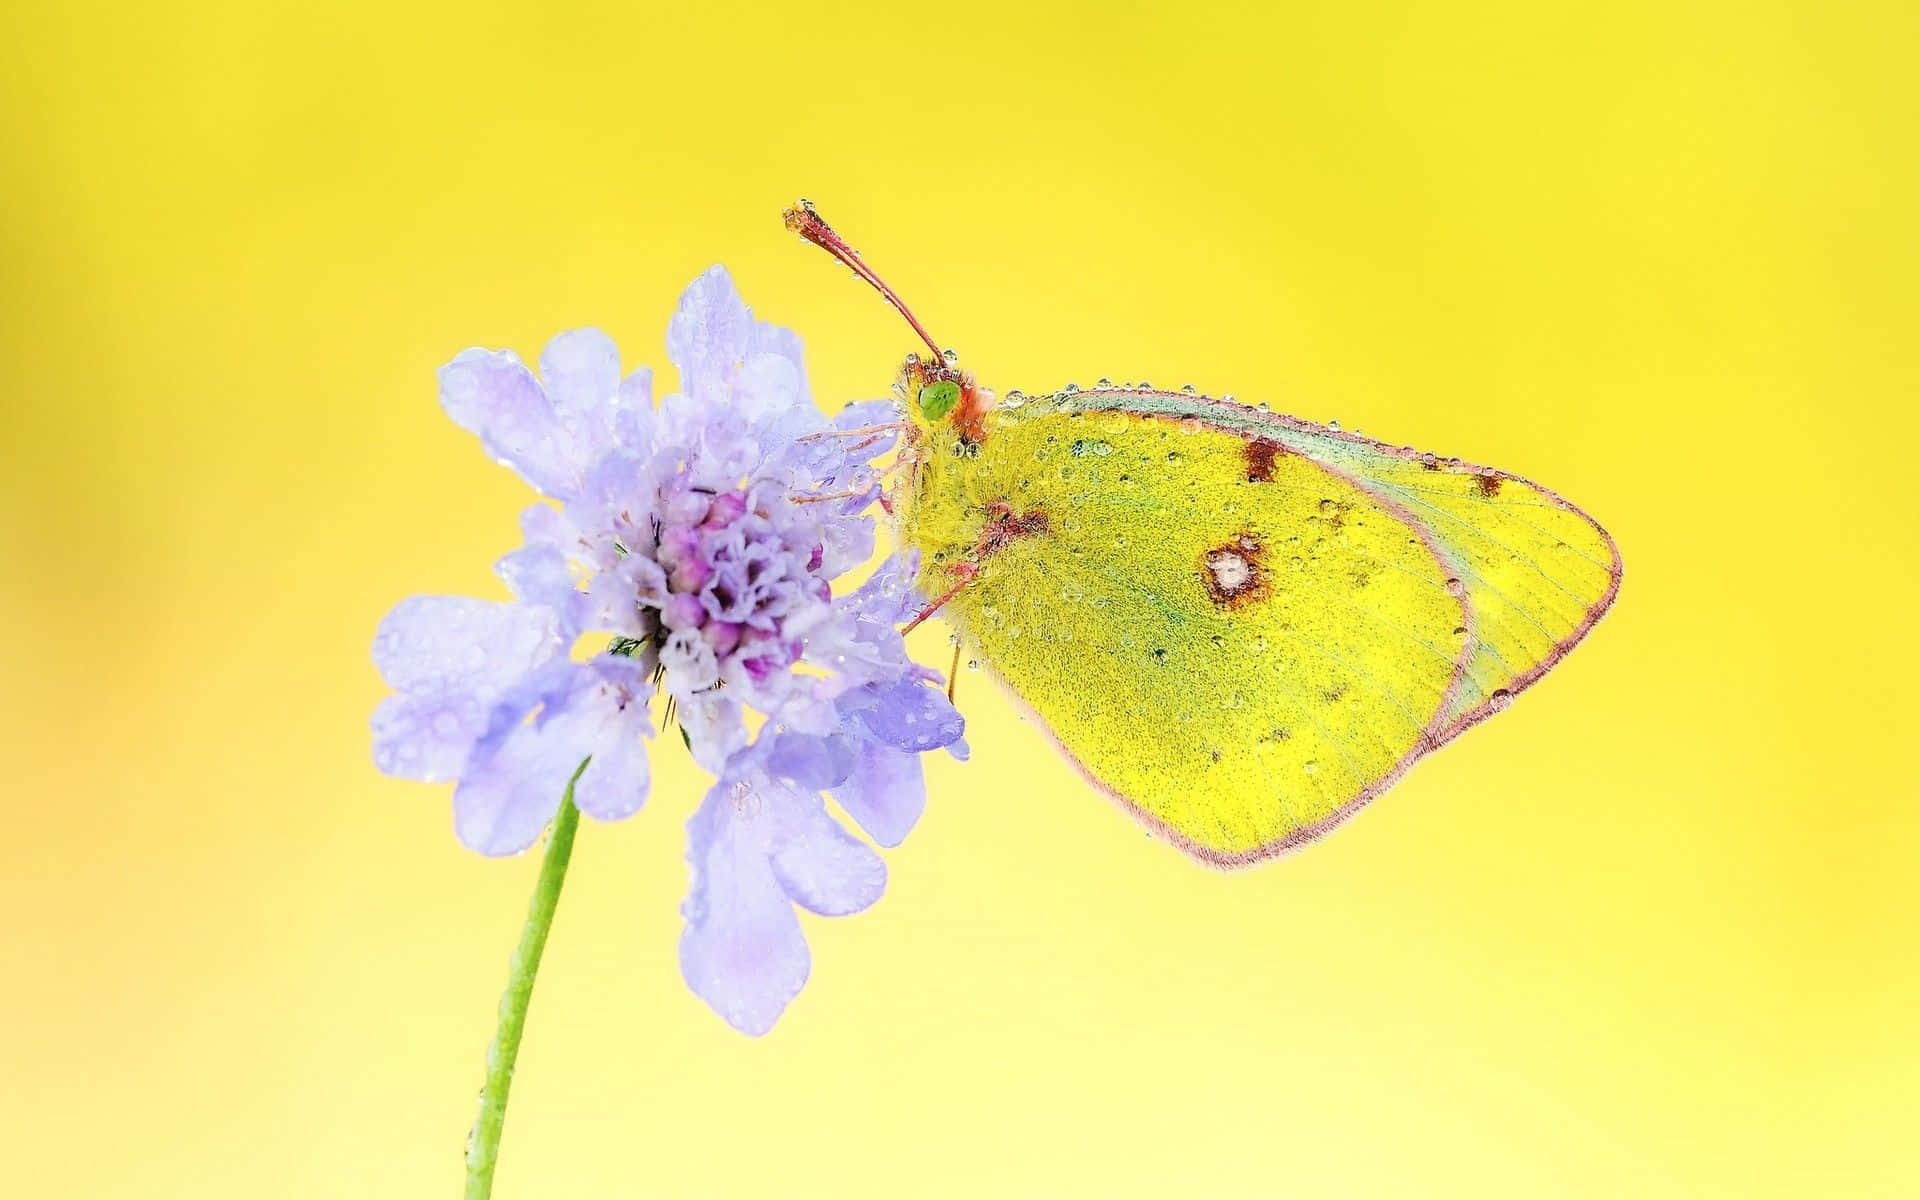 Captivating Yellow Butterfly Wallpaper